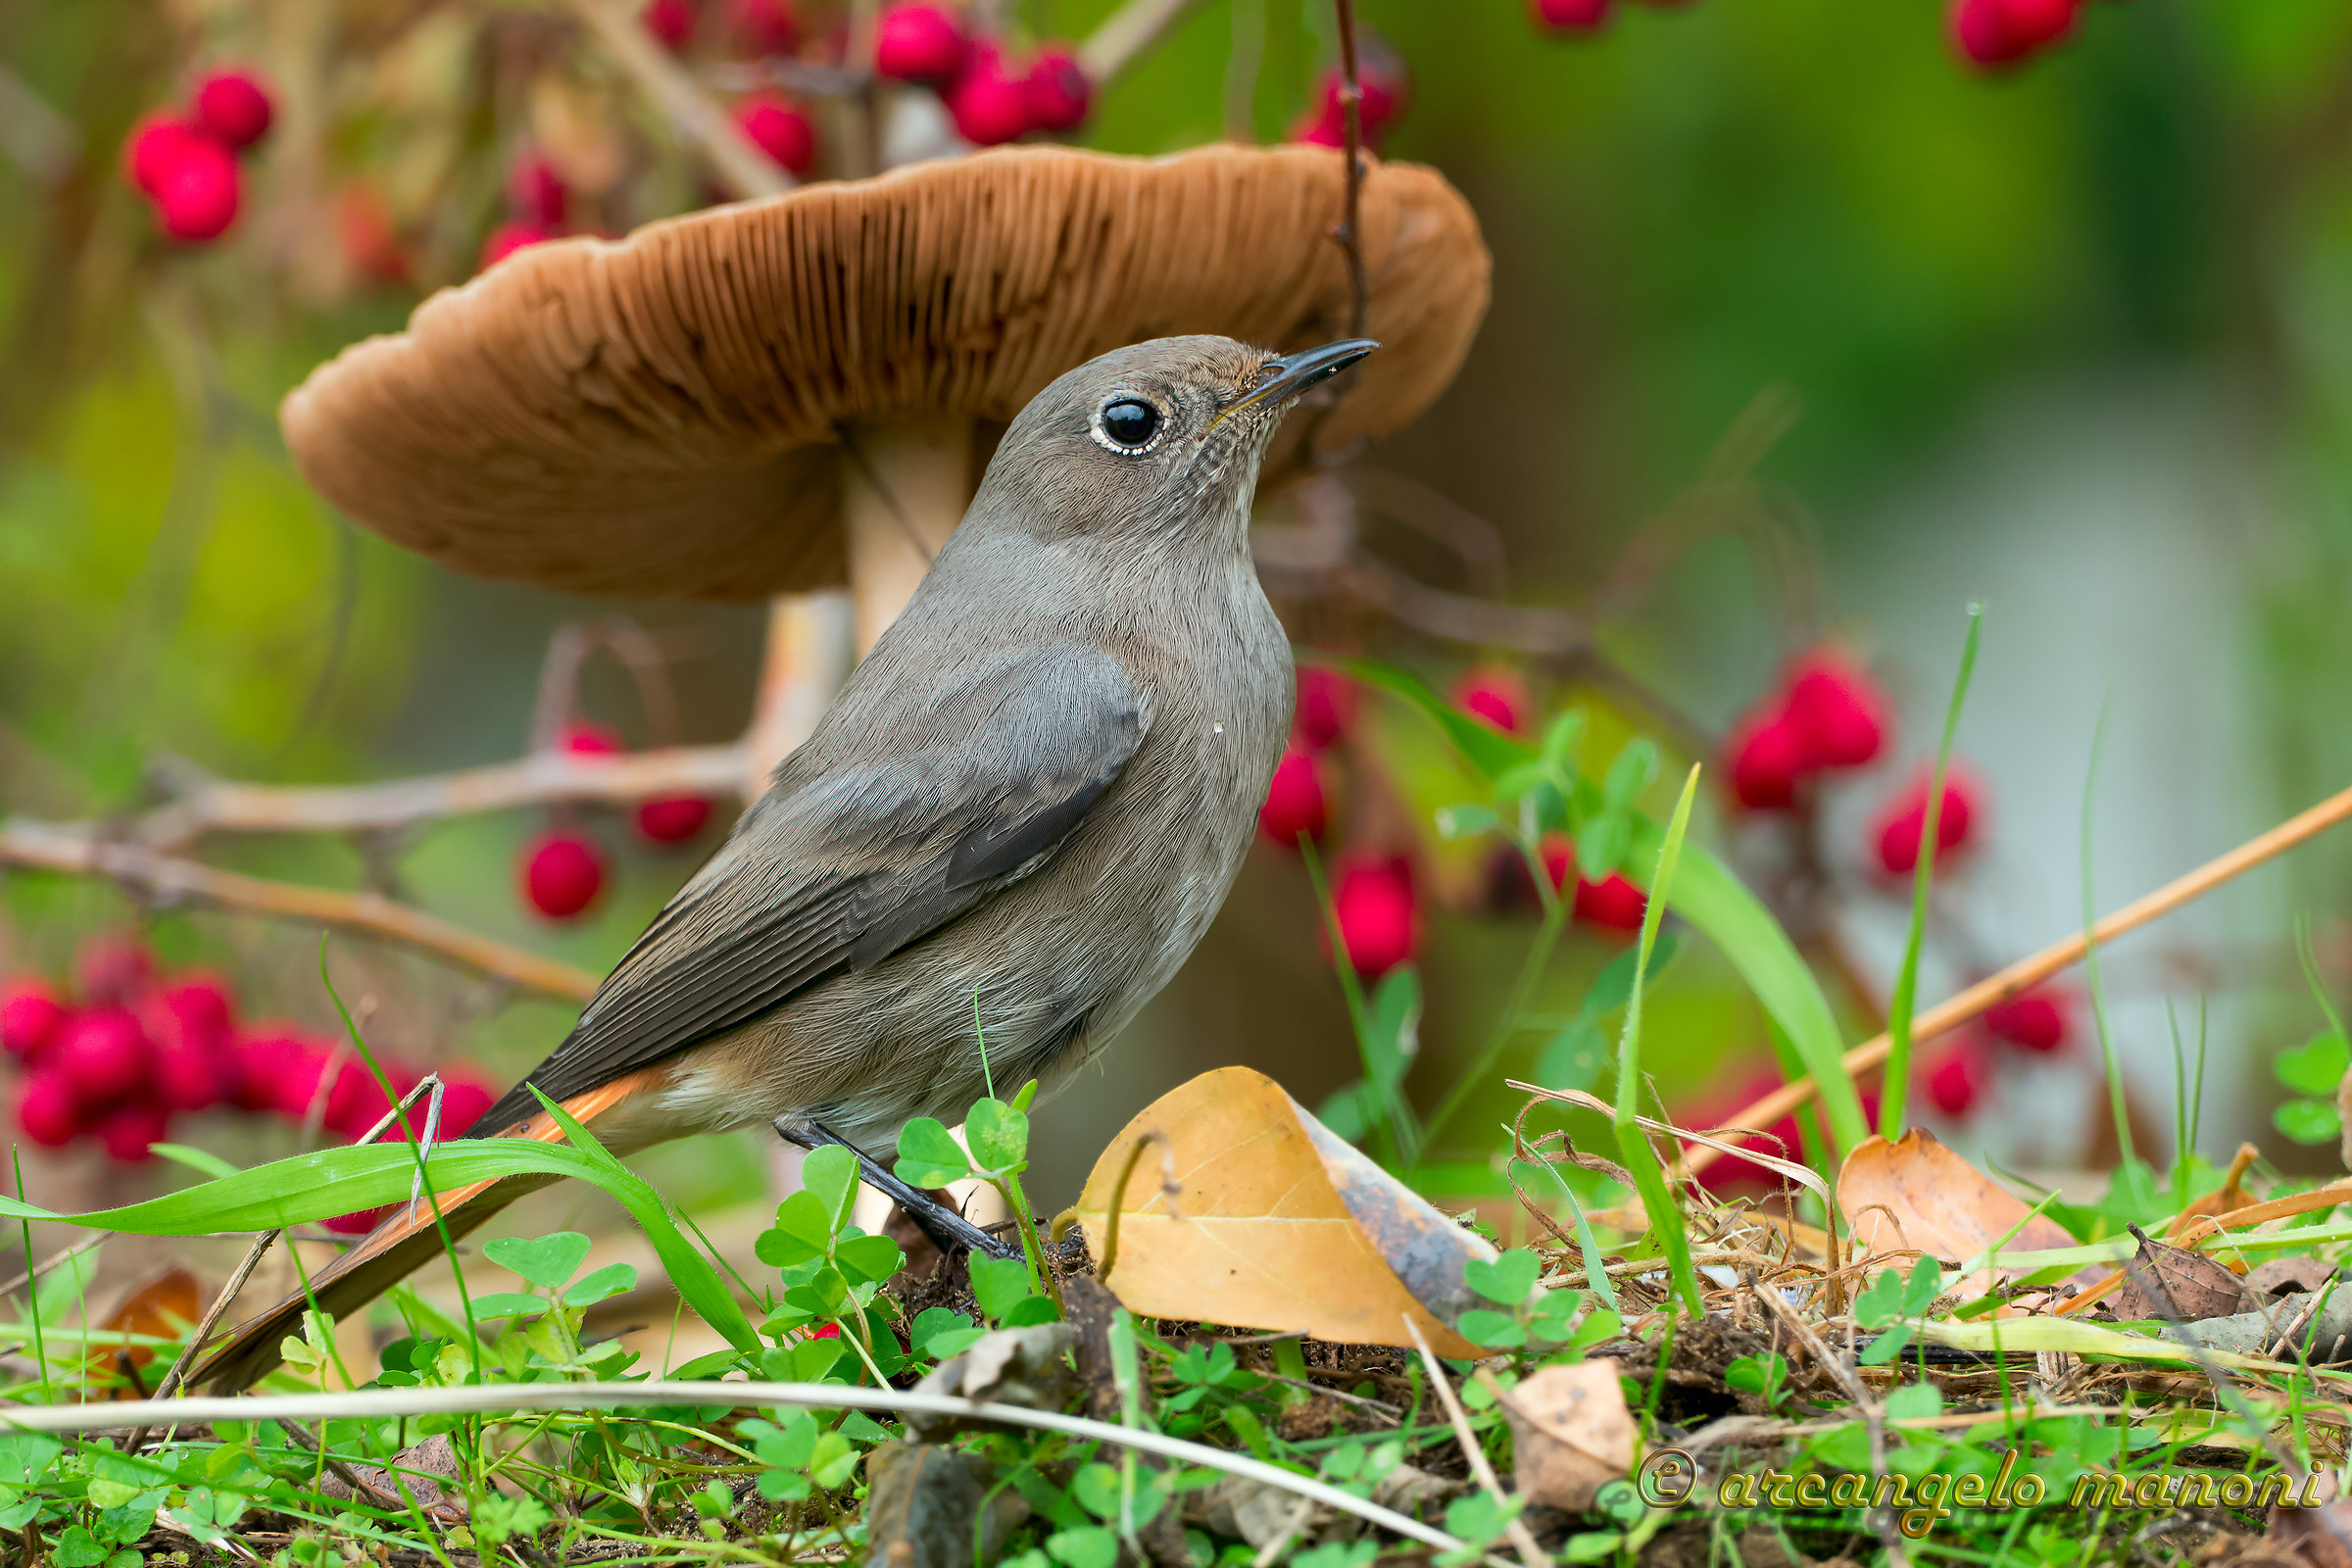 The fungus, berries and redstart...